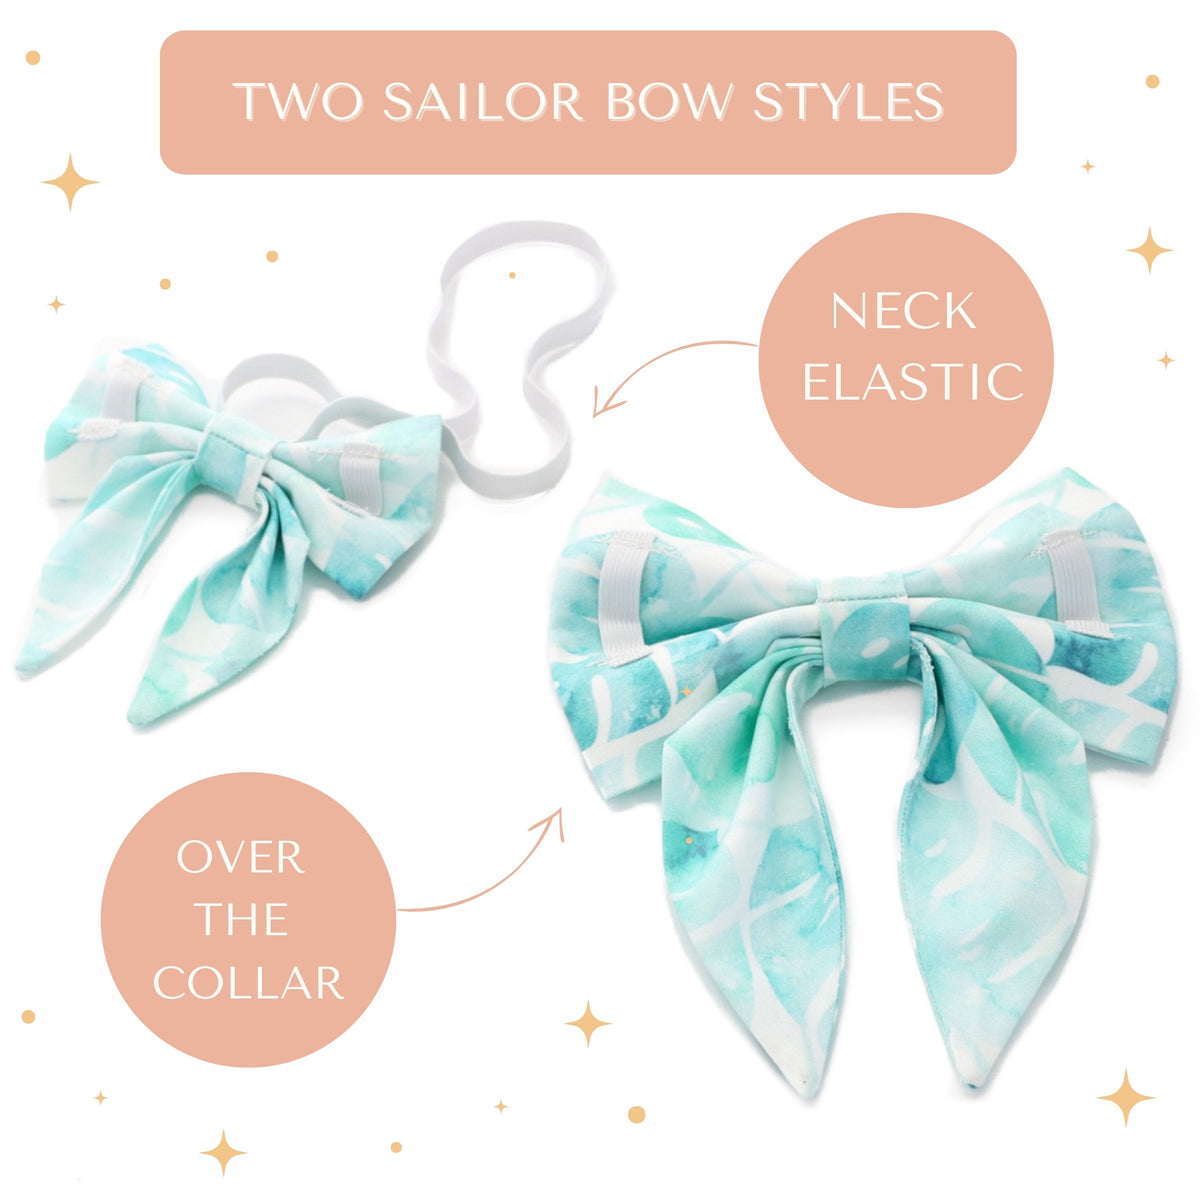 dog sailor bow over the collar or elastic